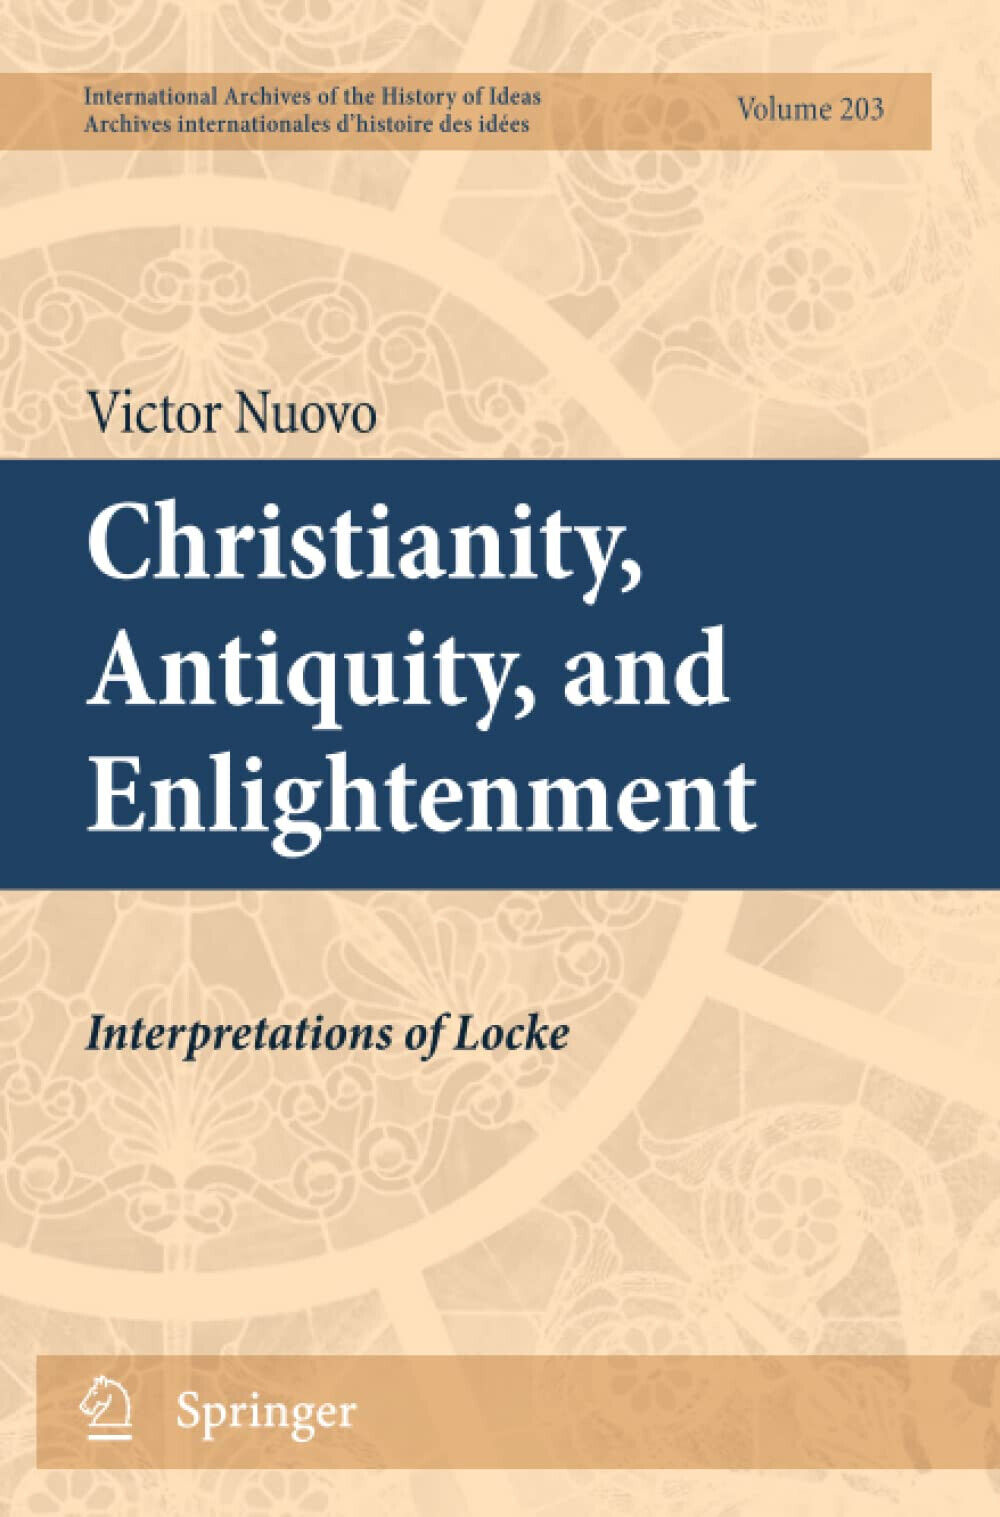 Christianity, Antiquity, and Enlightenment  - Victor Nuovo - Springer, 2013